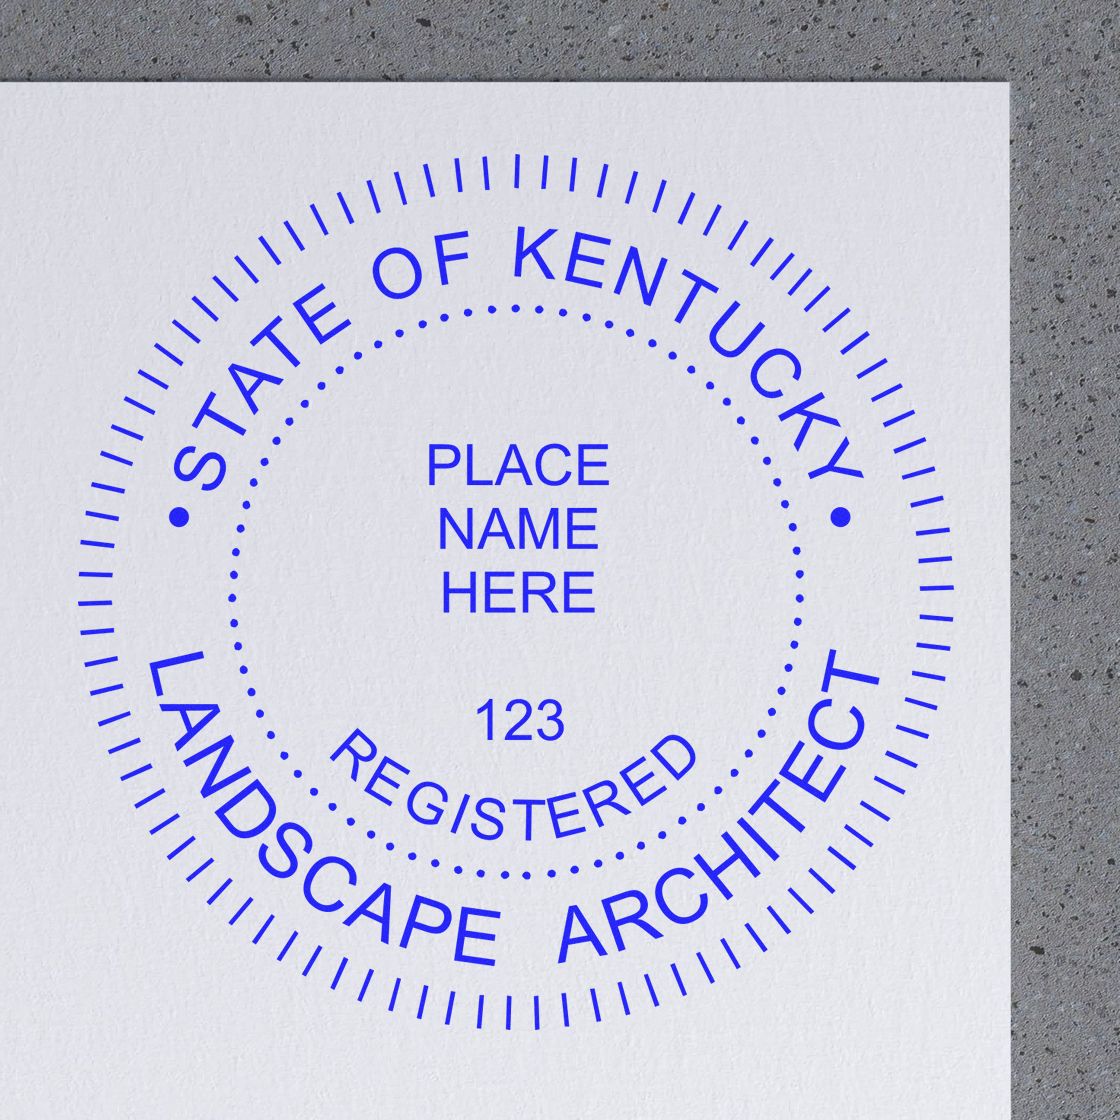 Kentucky Landscape Architectural Seal Stamp in use photo showing a stamped imprint of the Kentucky Landscape Architectural Seal Stamp